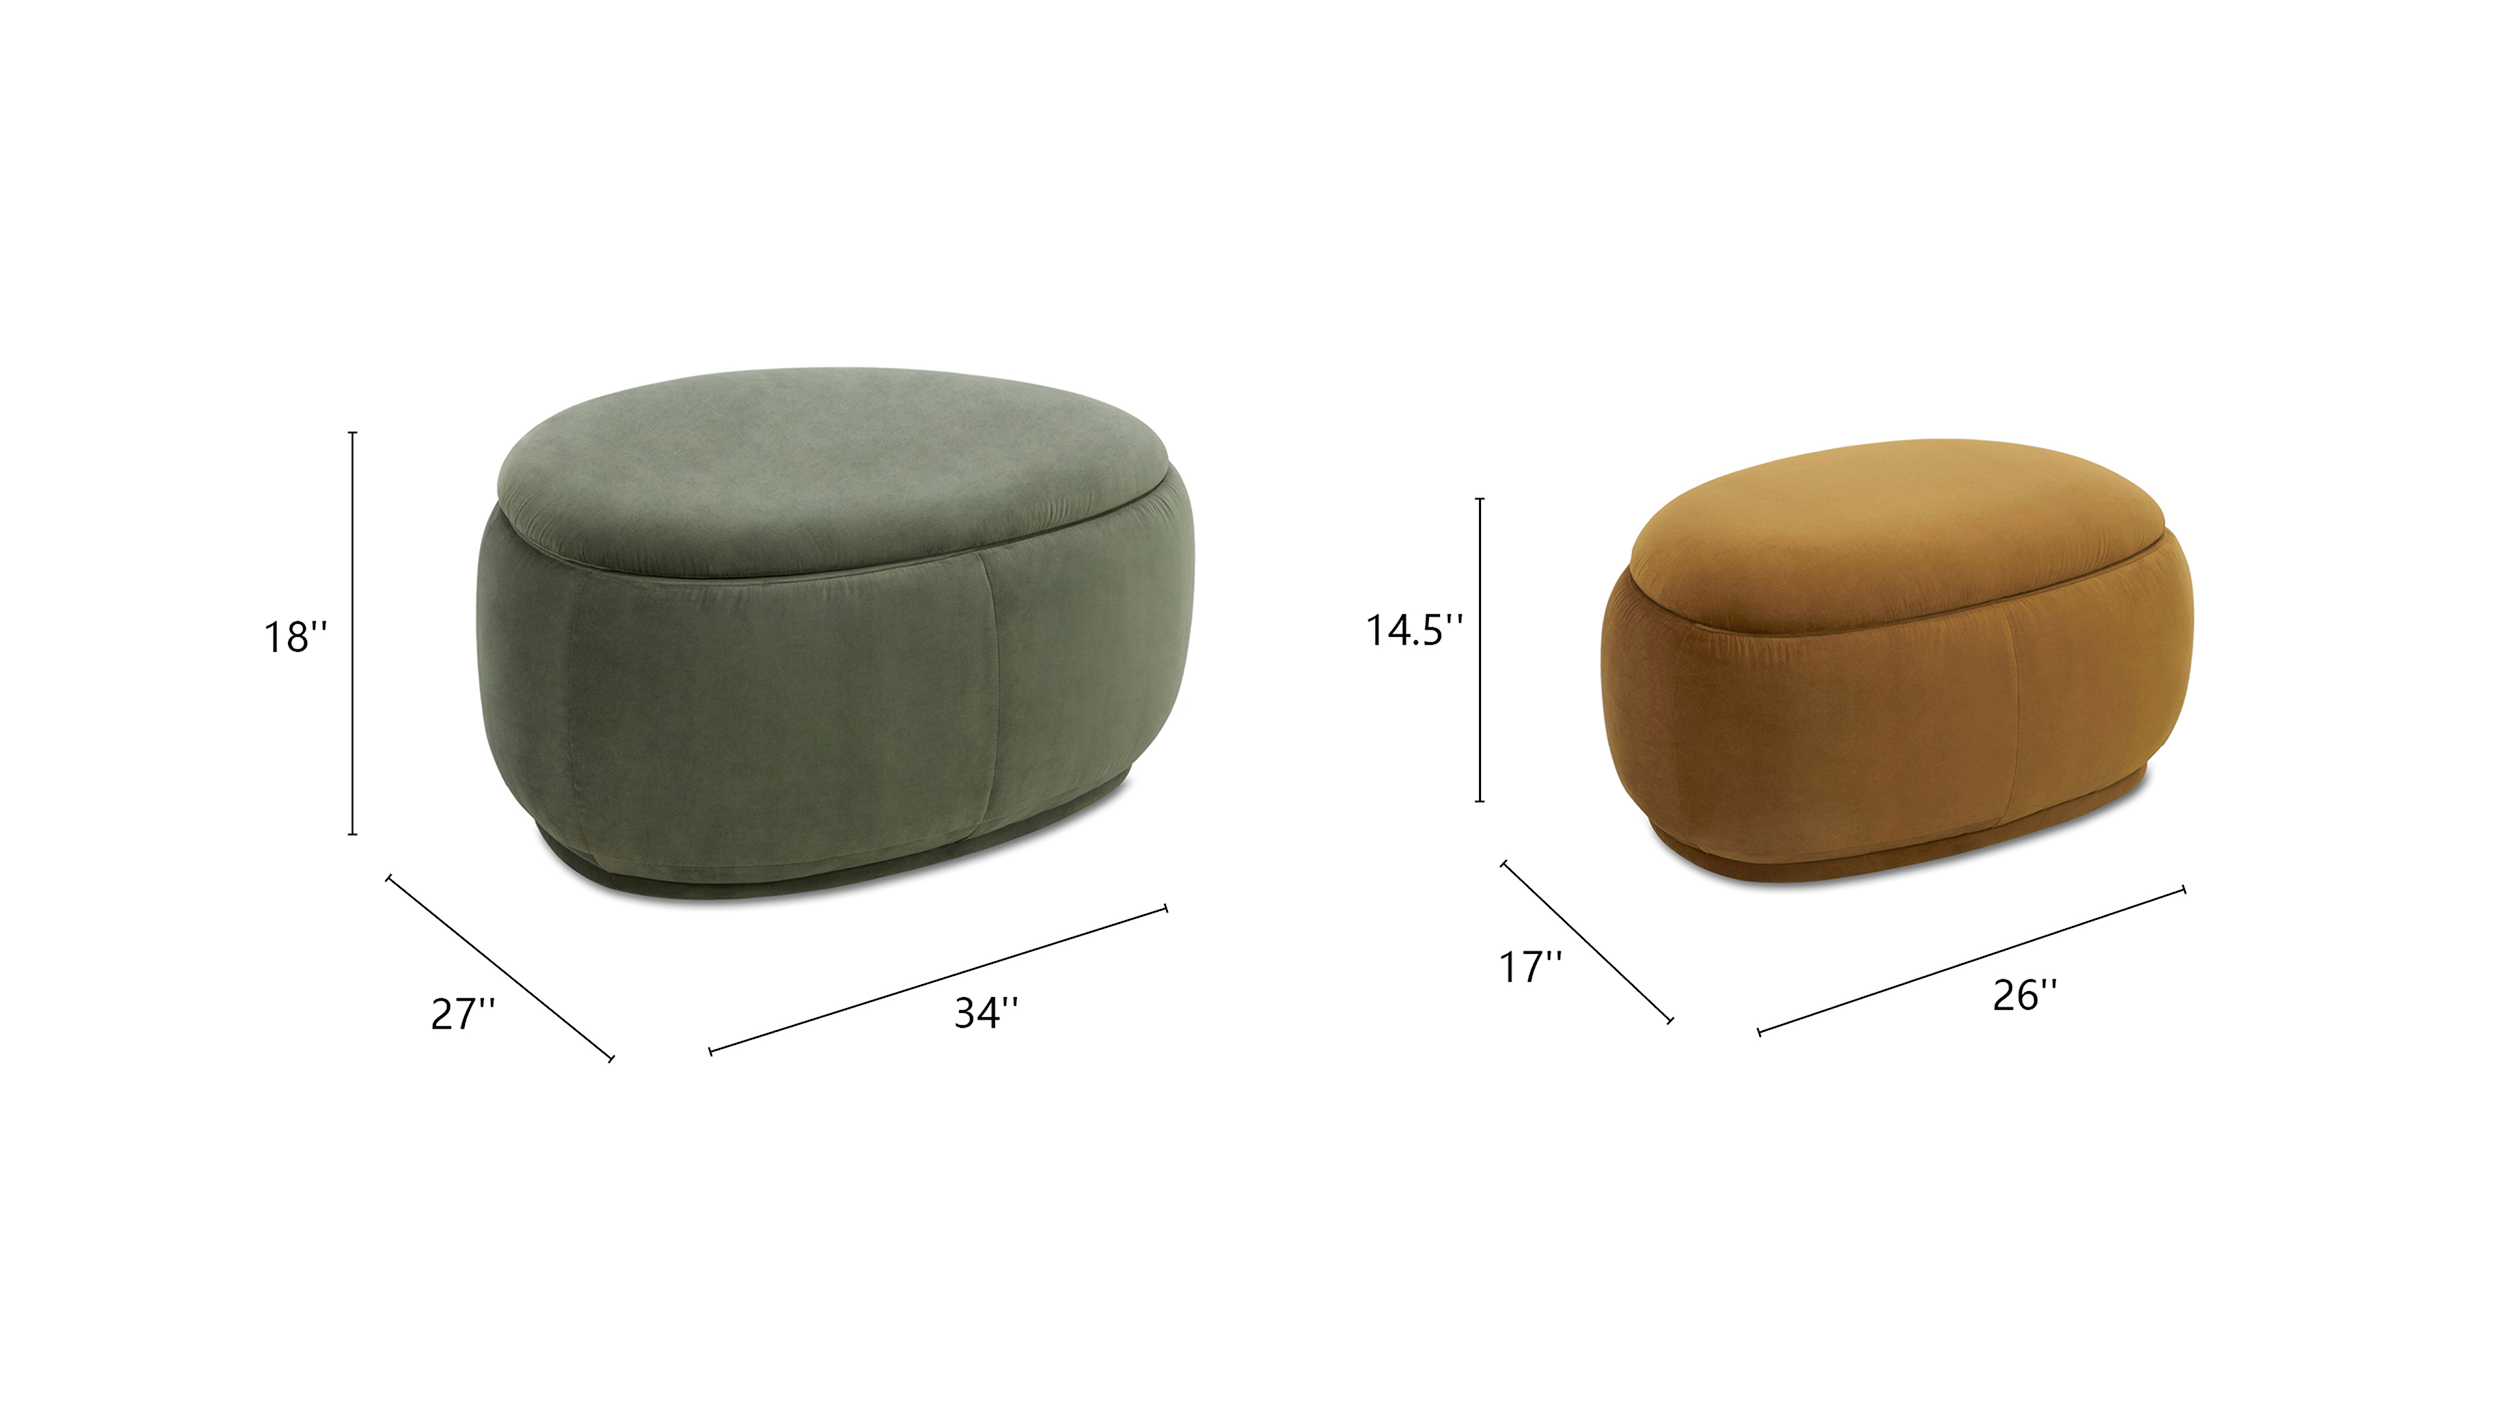 Bauble Rounded Pebble Storage Ottomans, Set of 2, Sage Green & Earthy Yello